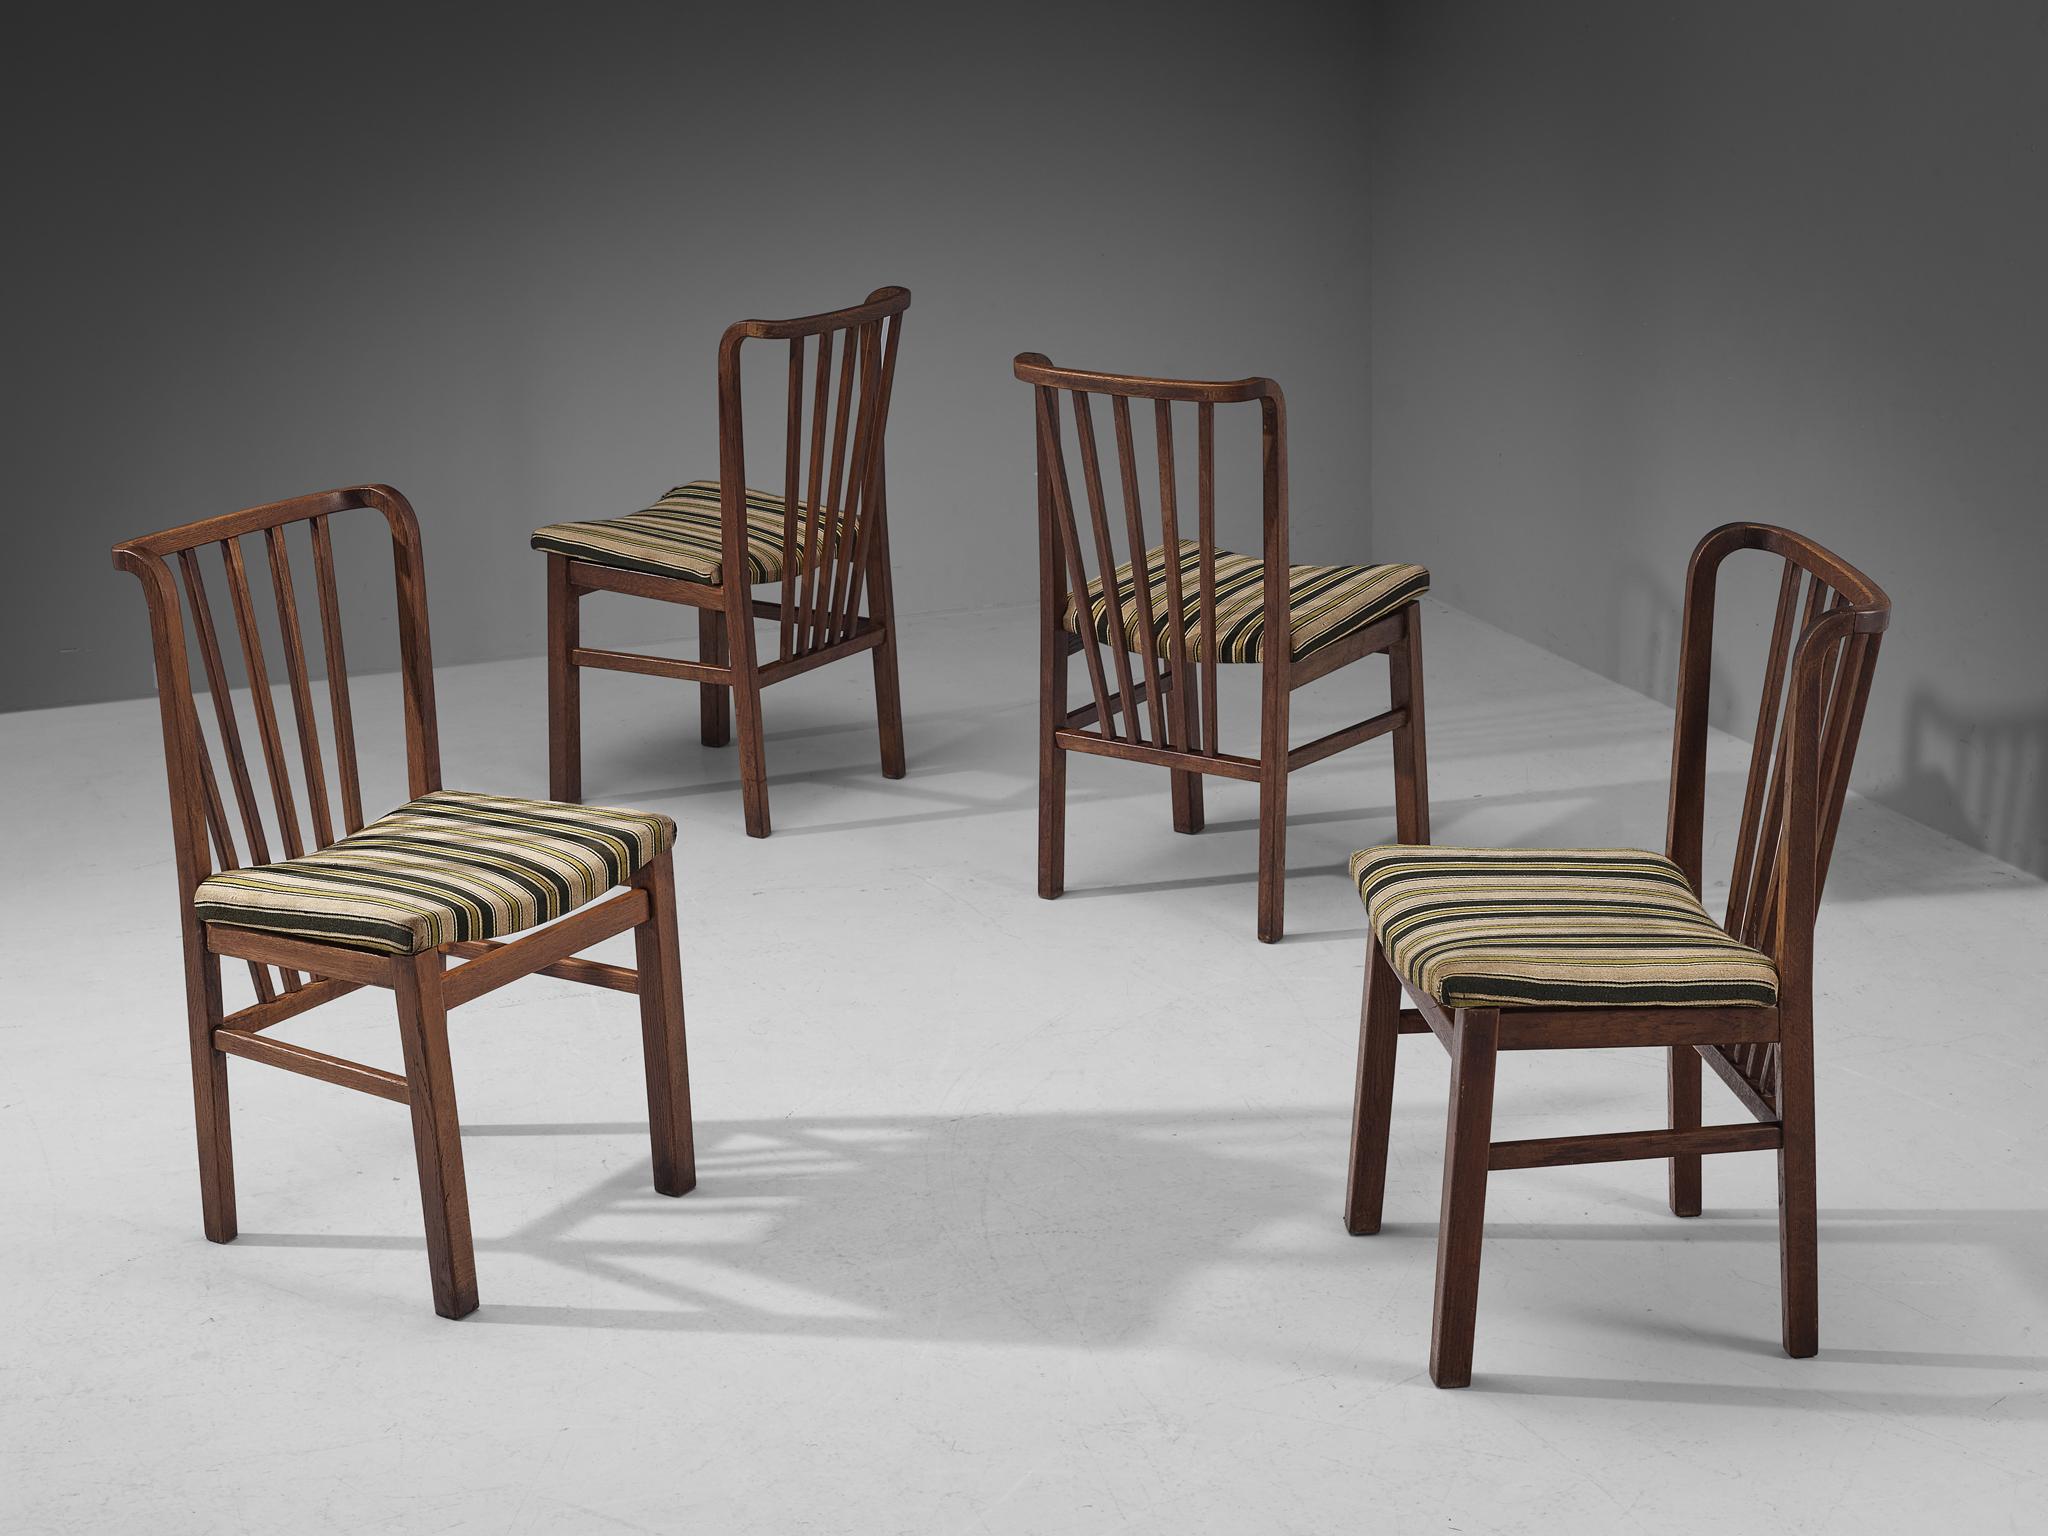 Dining chairs, stained oak, fabric, Europe, 1960s

Set of four spindle back dining chairs. The frame is executed in dark stained oak. An open construction is created by the use of spindles for the backrest. Furthermore, the spindles are placed